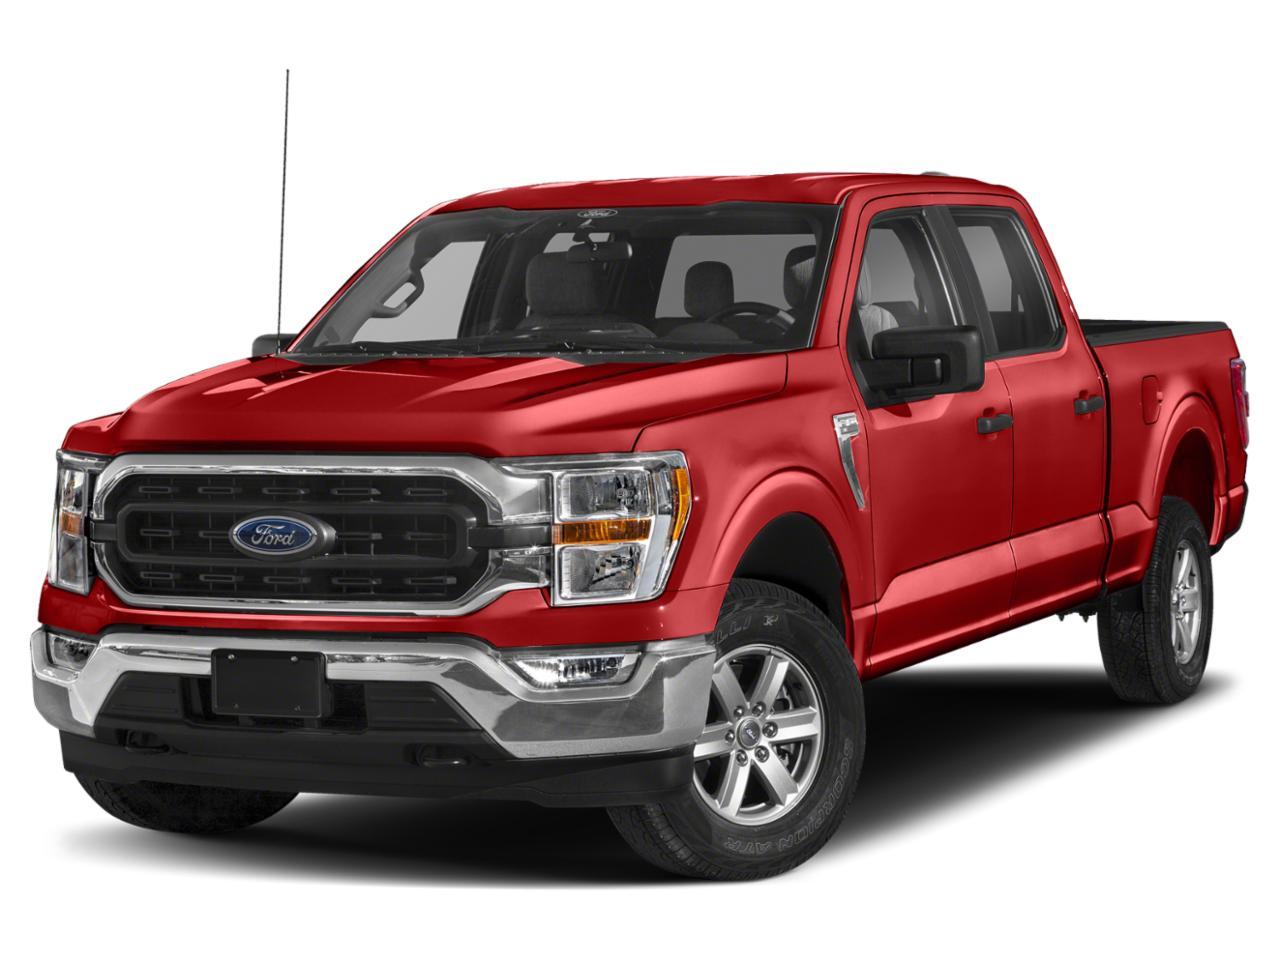 New Ford For Sale In Hannibal | Used Car Truck SUVs Near Me